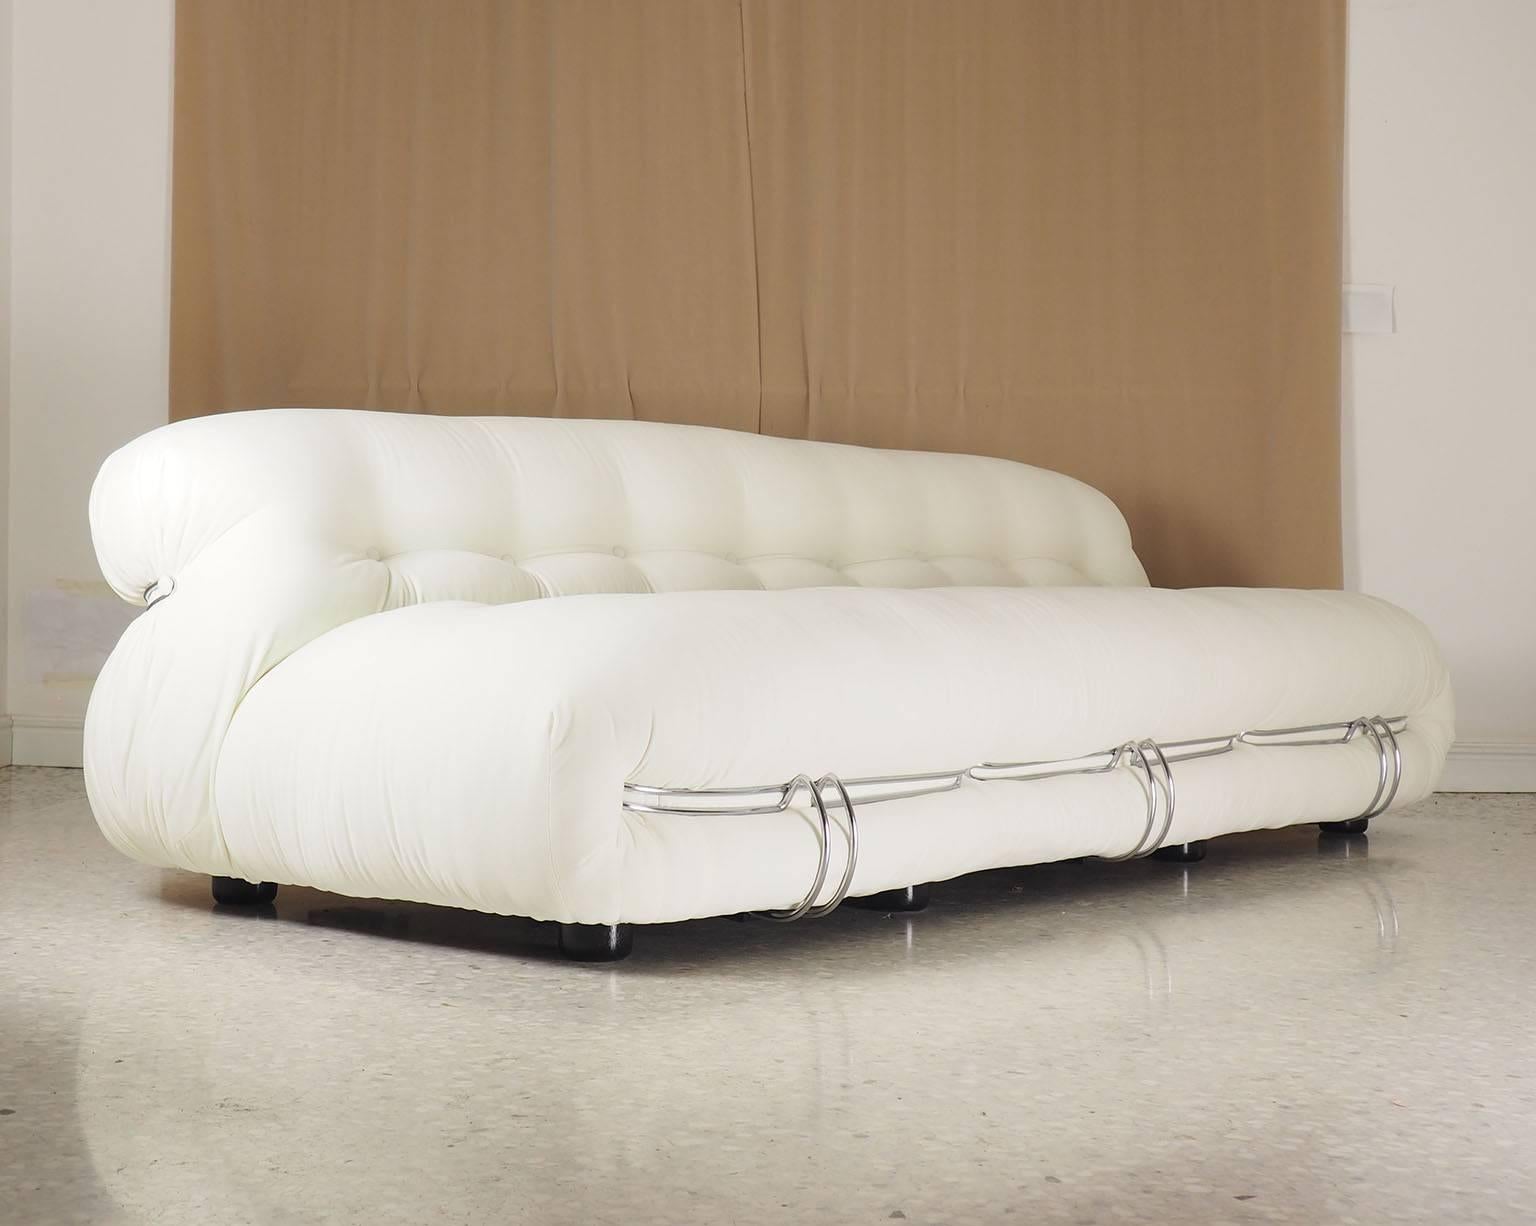 Soriana sofa designed for Cassina by Afra and Tobia Scarpa in 1969.
With its design comfortable and Fine
this sofa won a “Compasso d’Oro” prize in 1969. This example was produced in 1969 and upholstered in fine Italian white-ivory